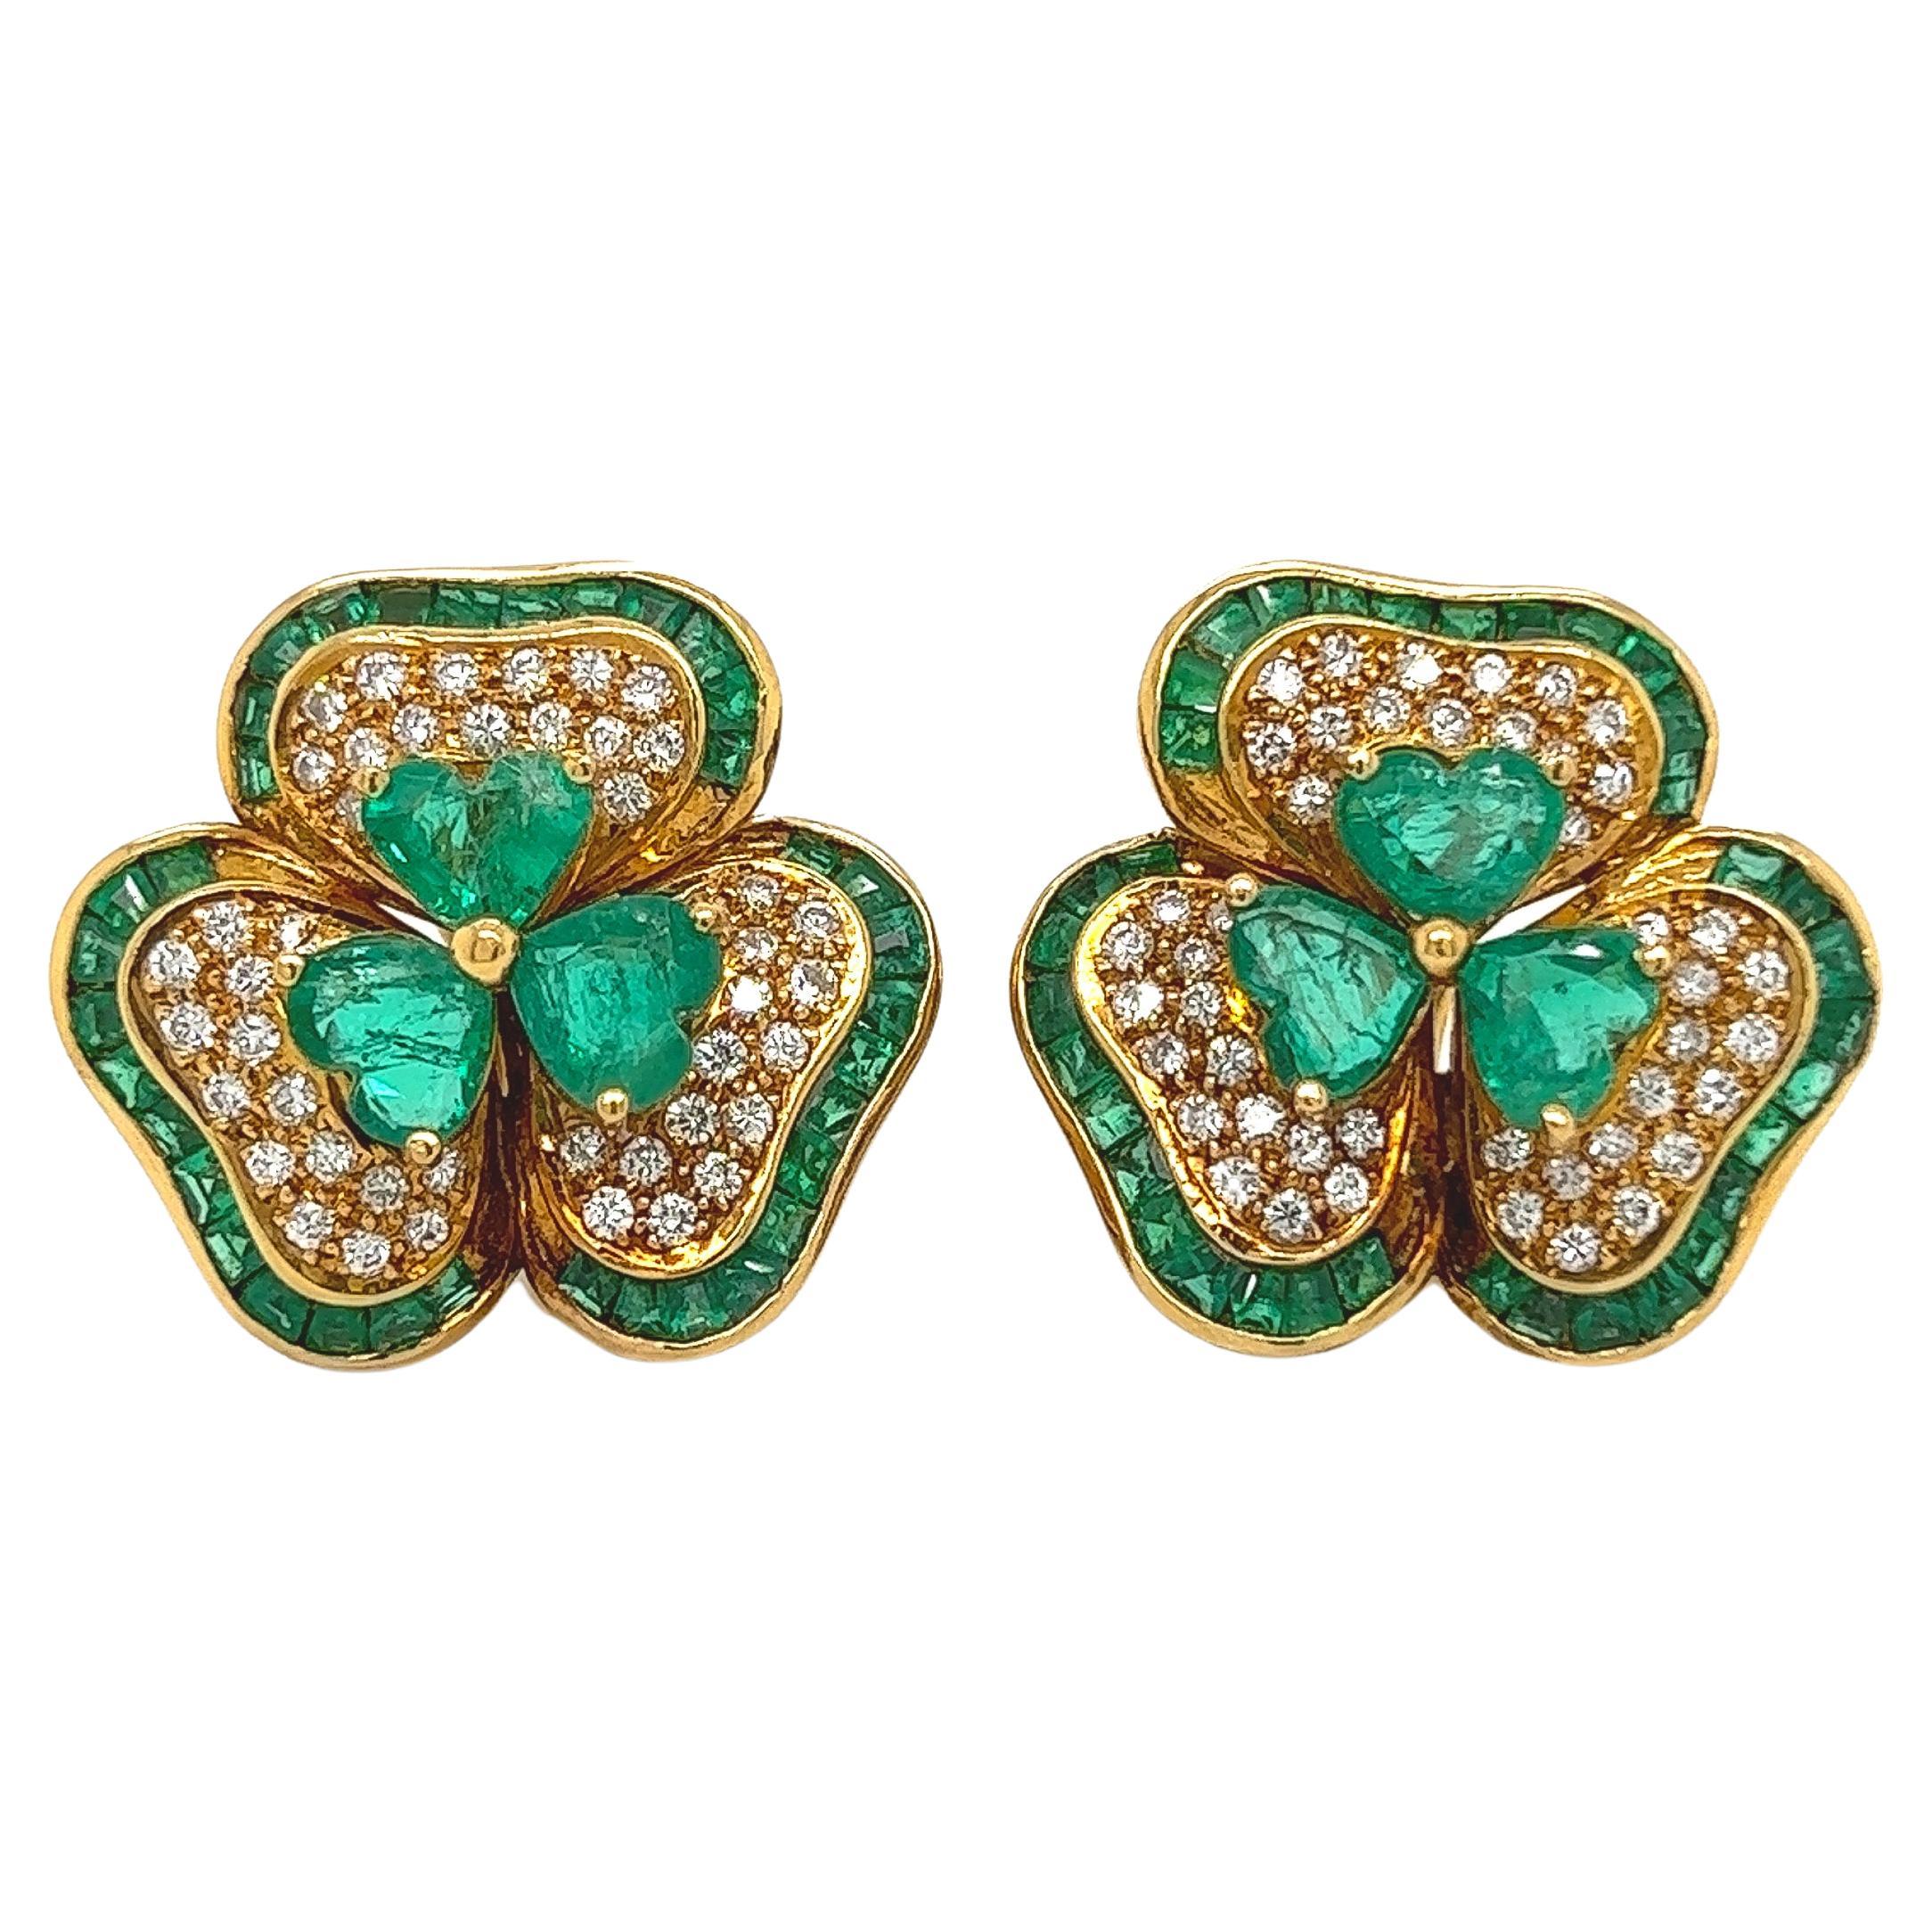 11.55 Total CT Lucky Clover 18K Yellow Gold Diamond & Colombian Emerald Earrings For Sale